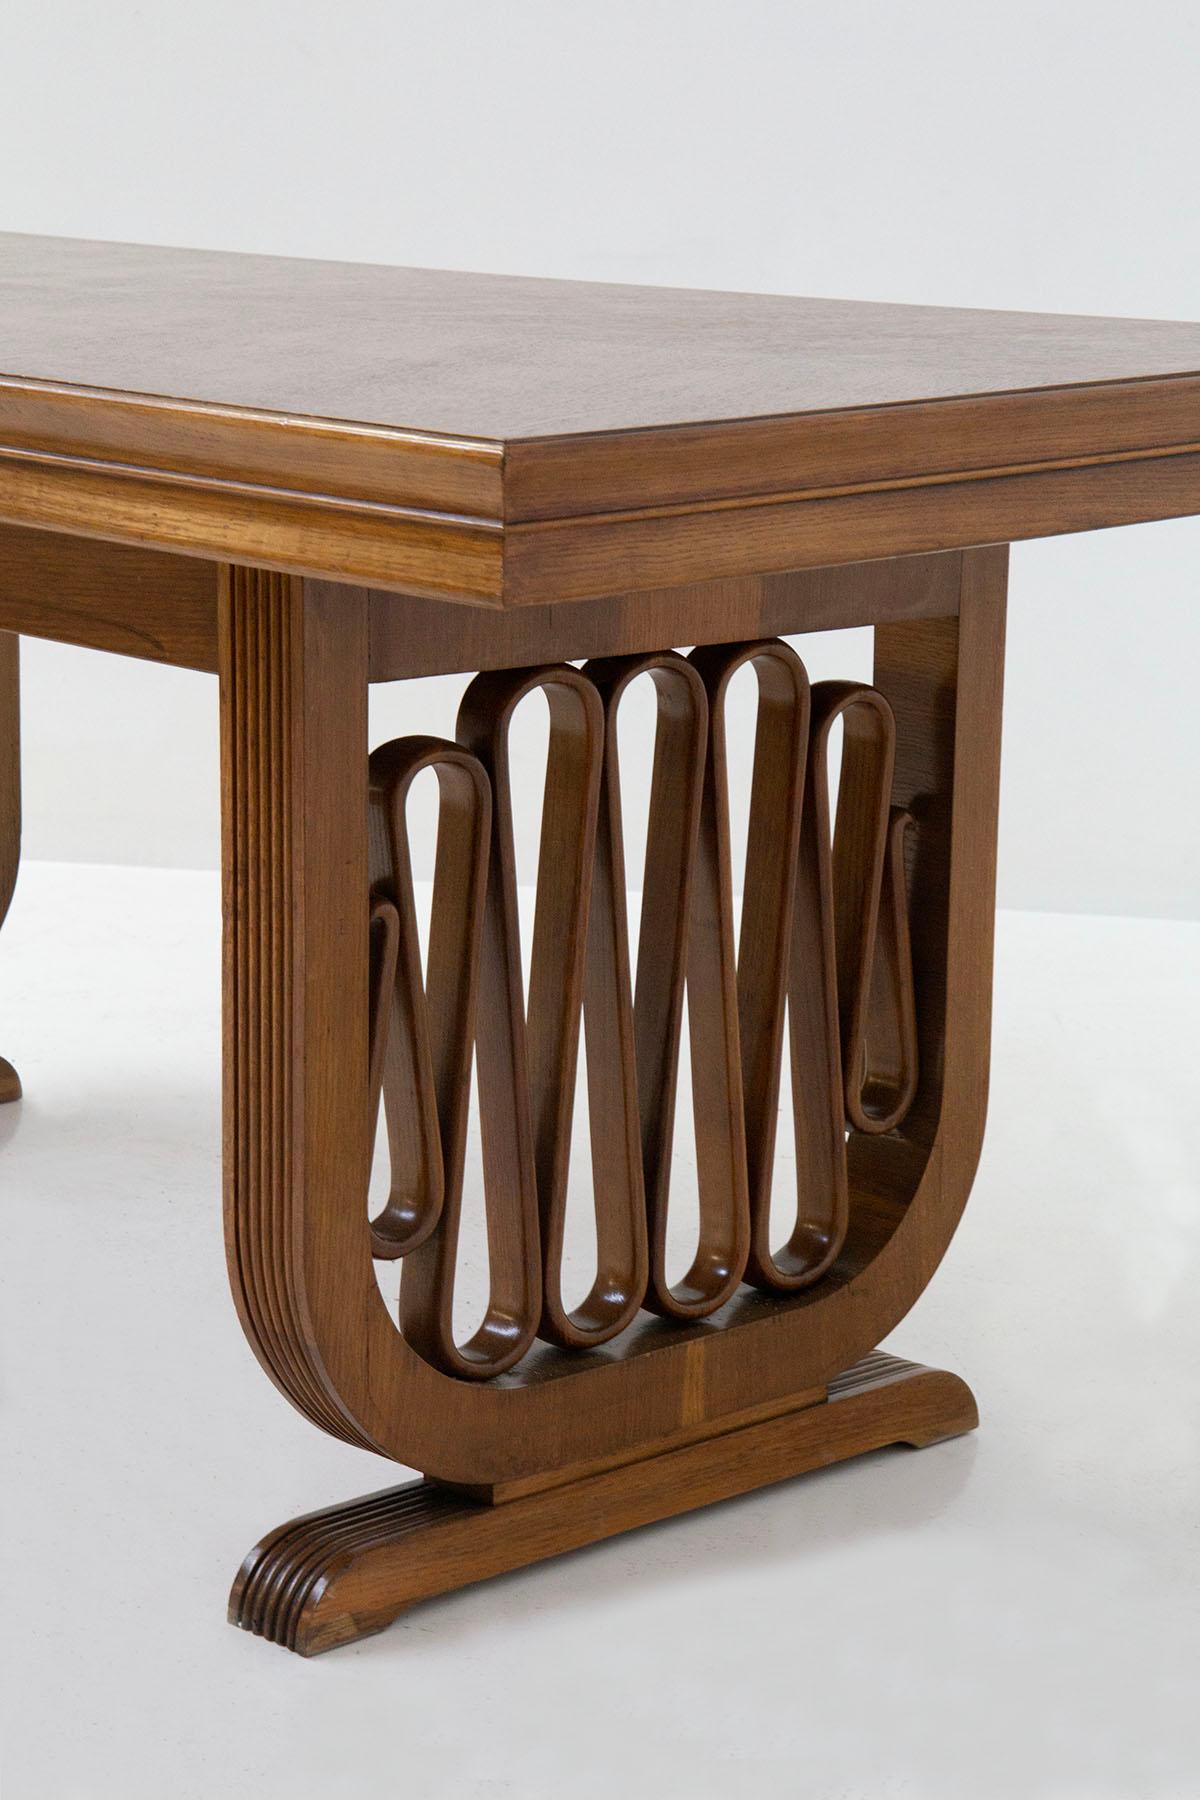 Berlin Iron Gio Ponti Attributed Important Wooden Volute Dining Table